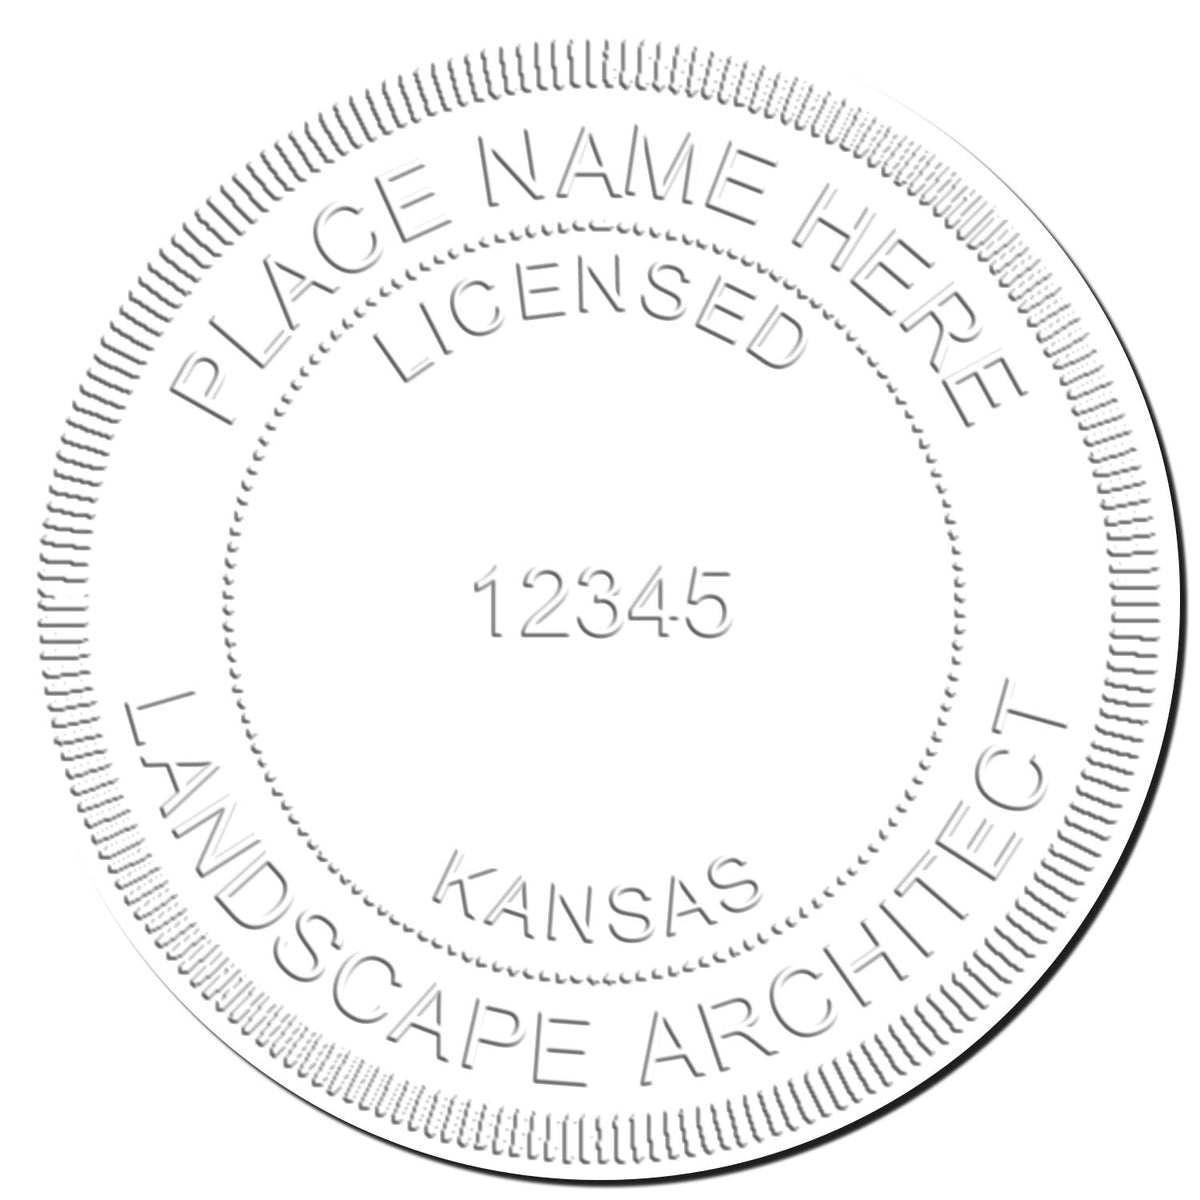 This paper is stamped with a sample imprint of the Hybrid Kansas Landscape Architect Seal, signifying its quality and reliability.